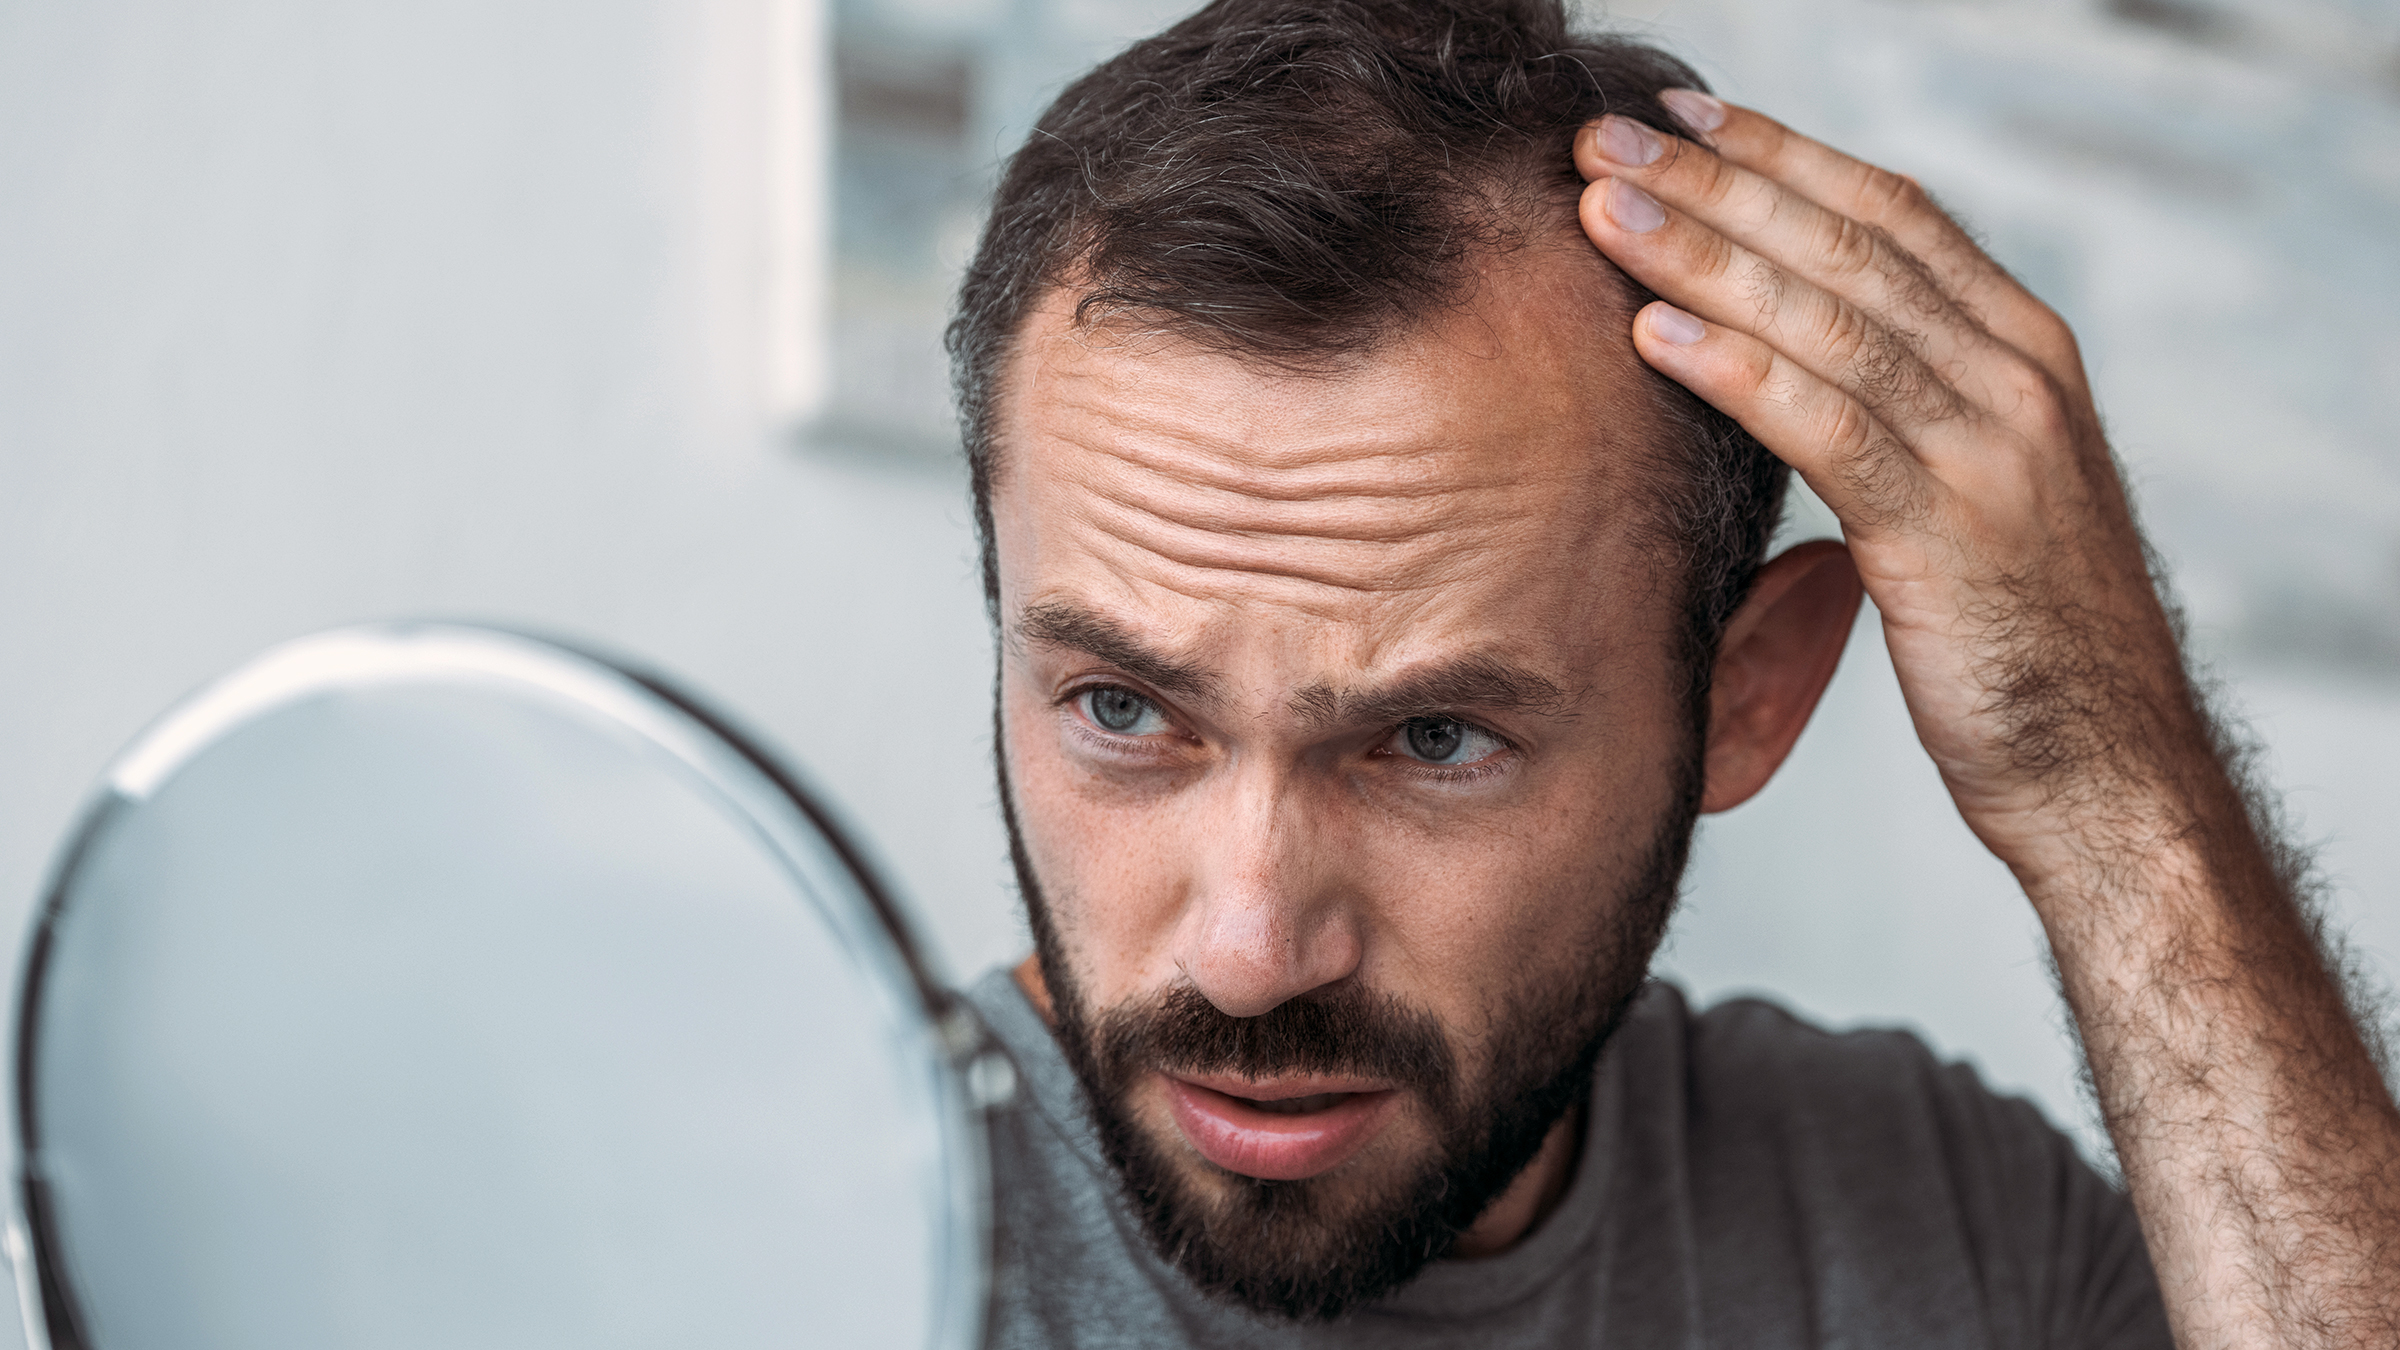 Hair Loss in Men: How to Treat It and See the Signs - GoodRx